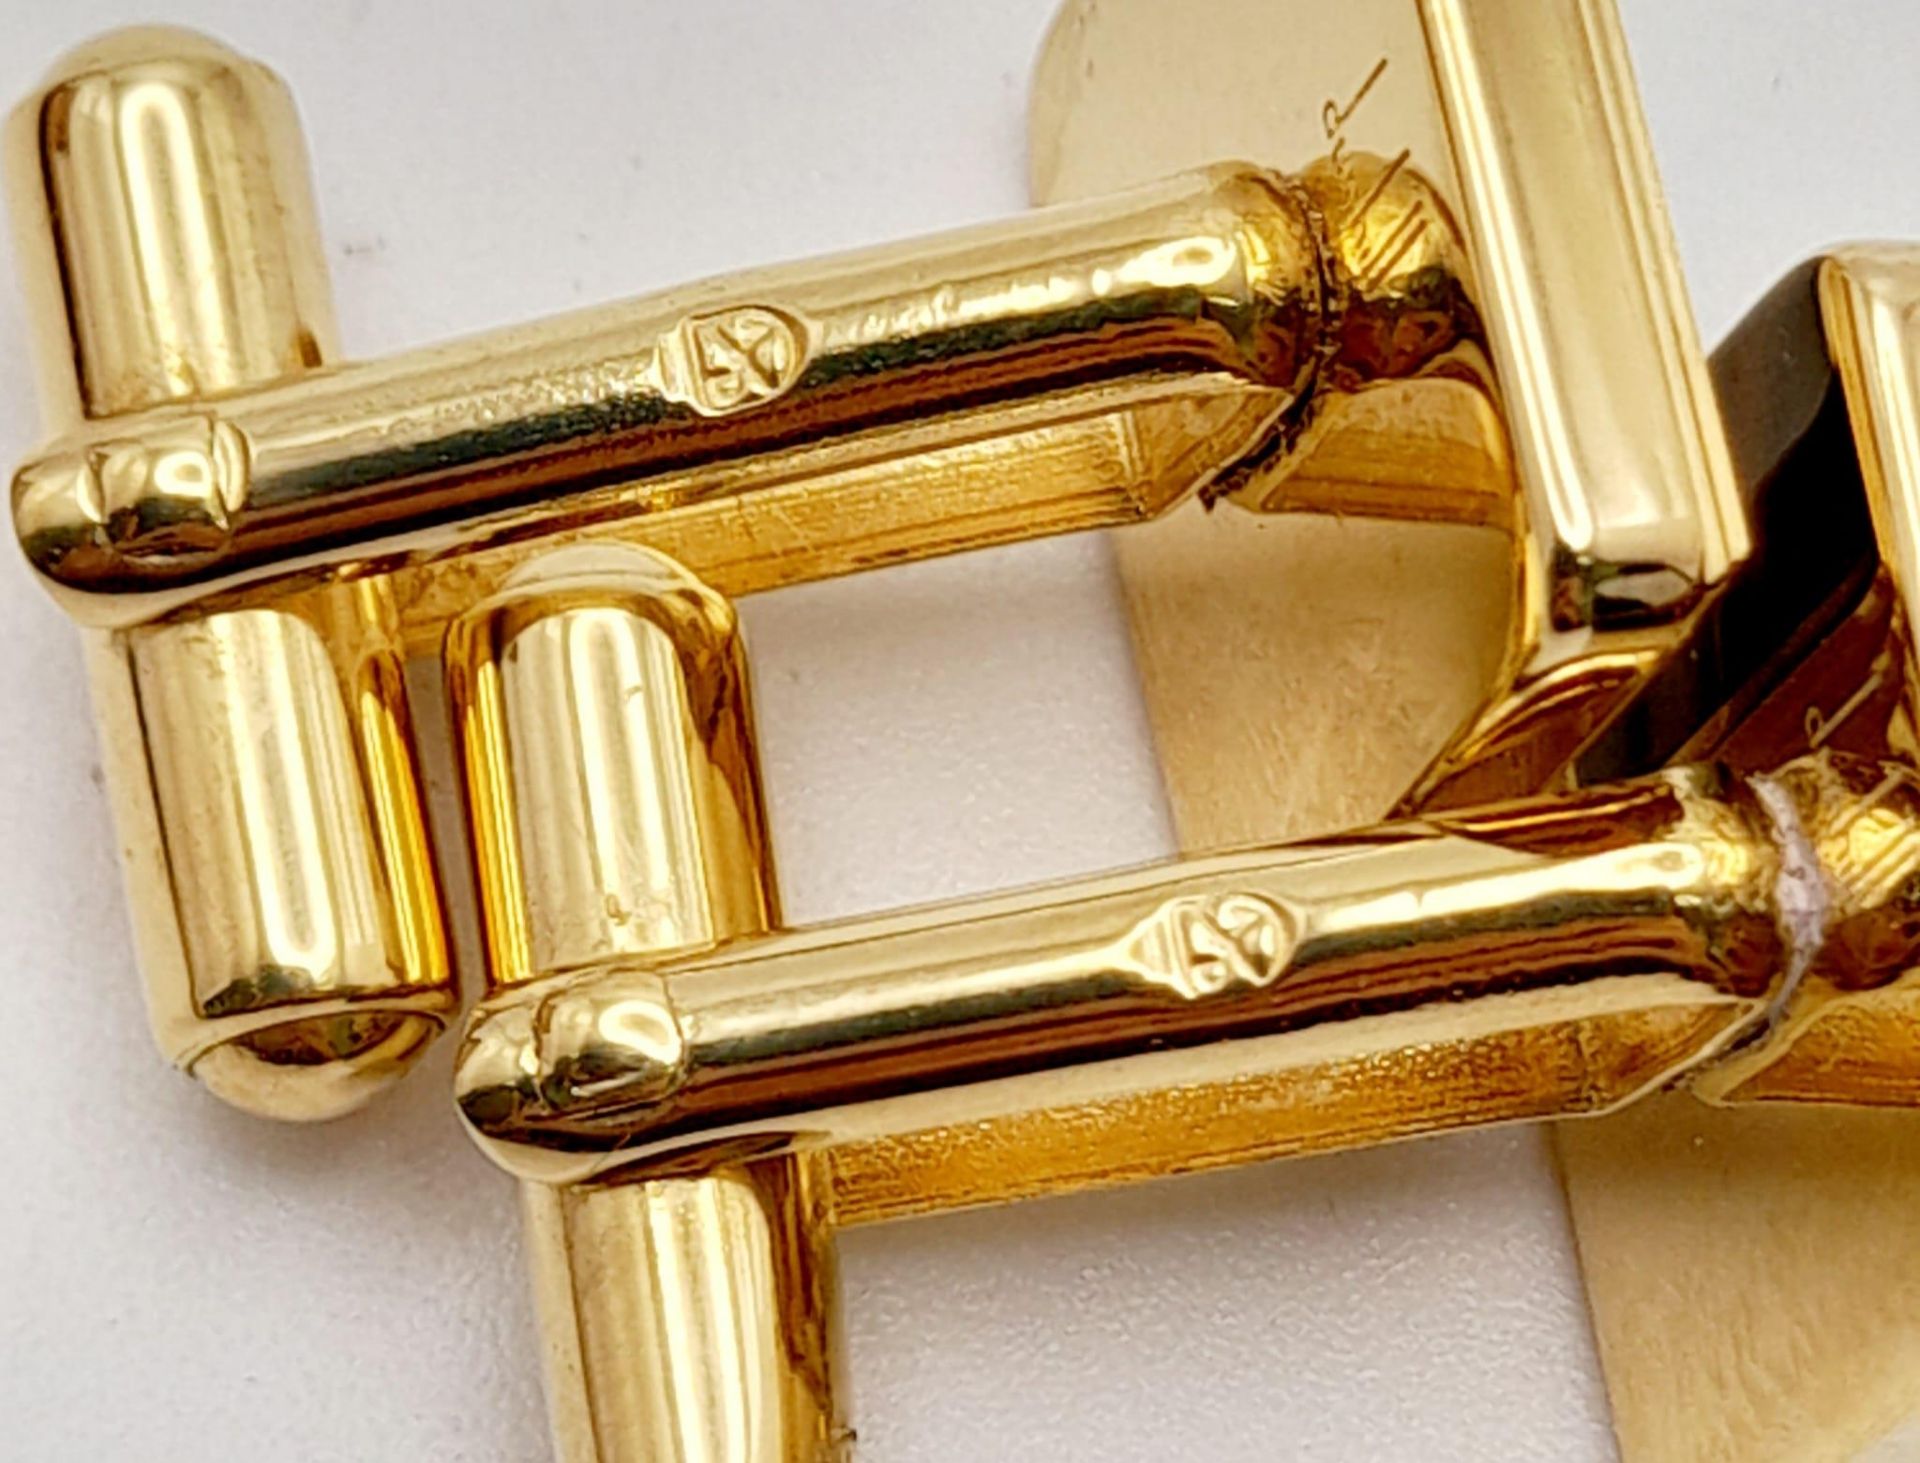 An Excellent Condition Pair of Square Yellow Gold Gilt Tortoiseshell Cufflinks by Dunhill in their - Image 5 of 8